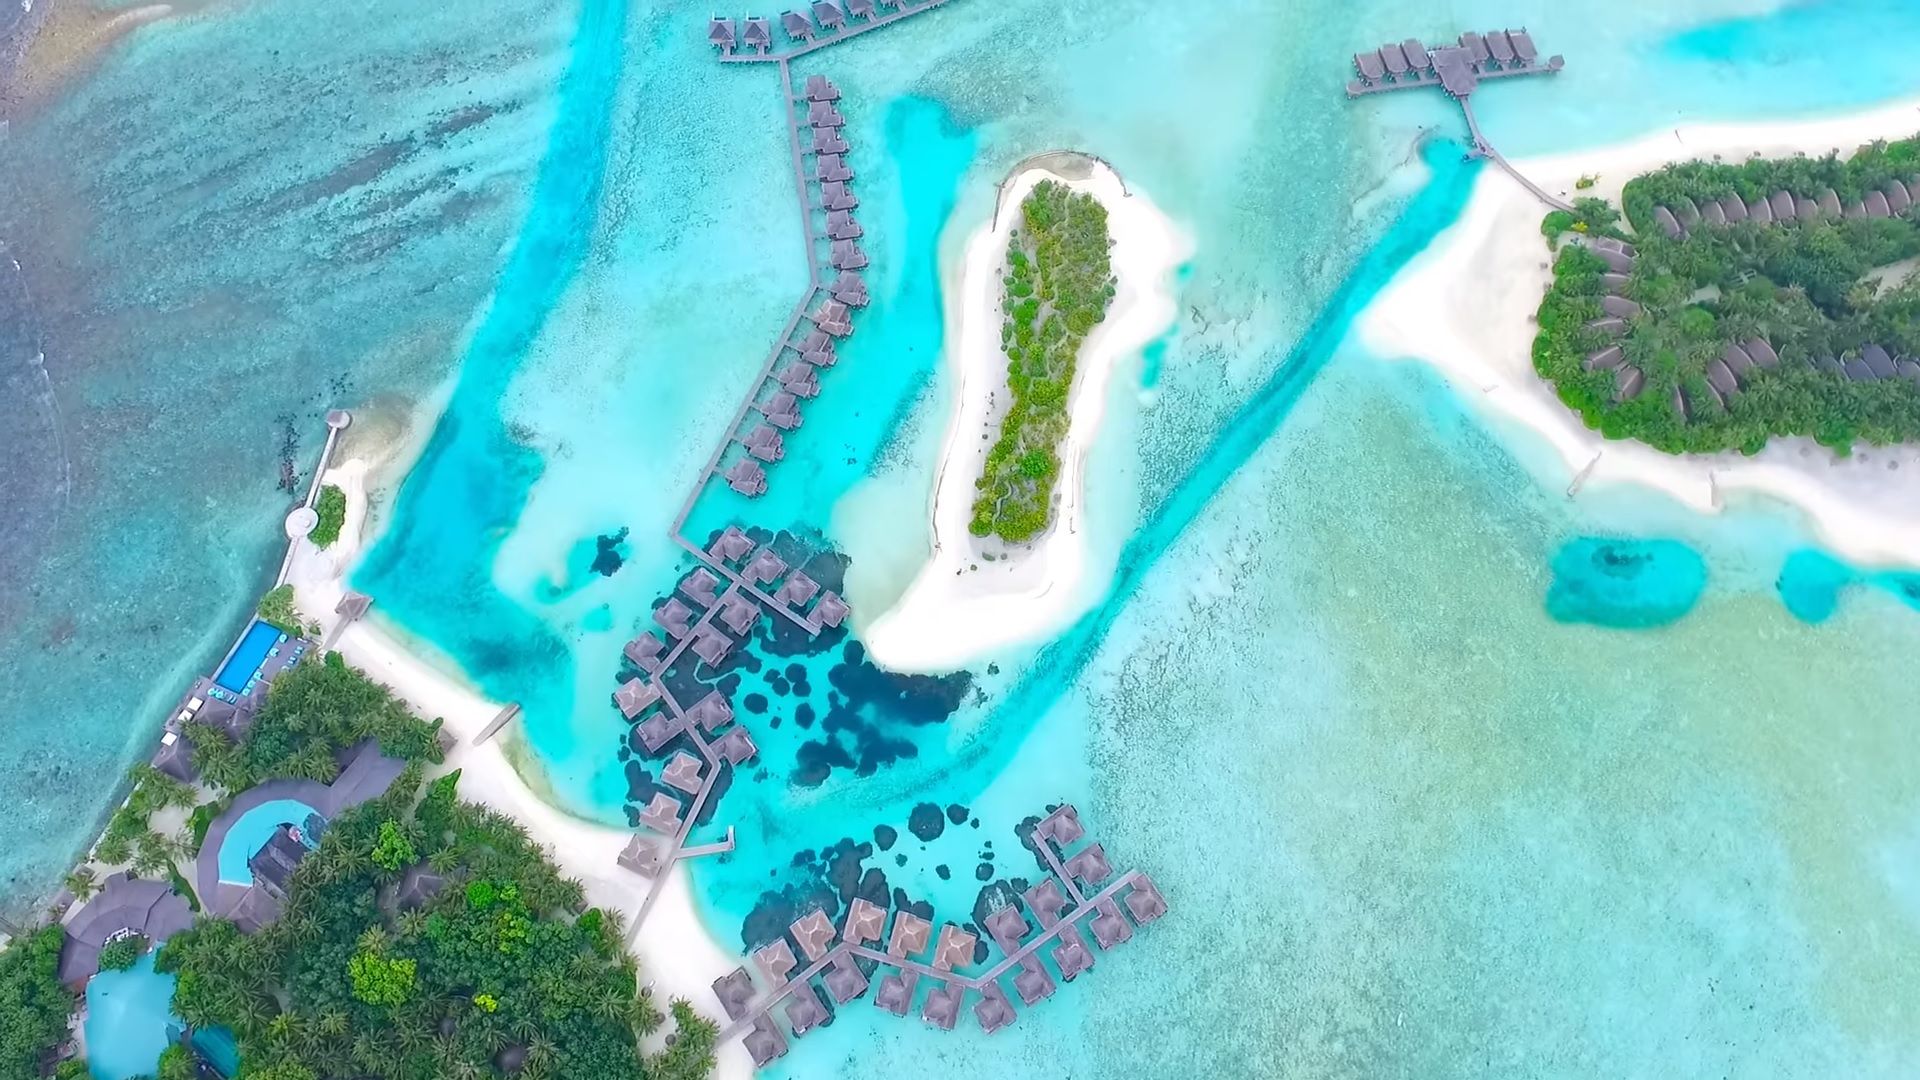 Maldives Tropical Paradise View From Drone HD Wallpaper 1920x1080